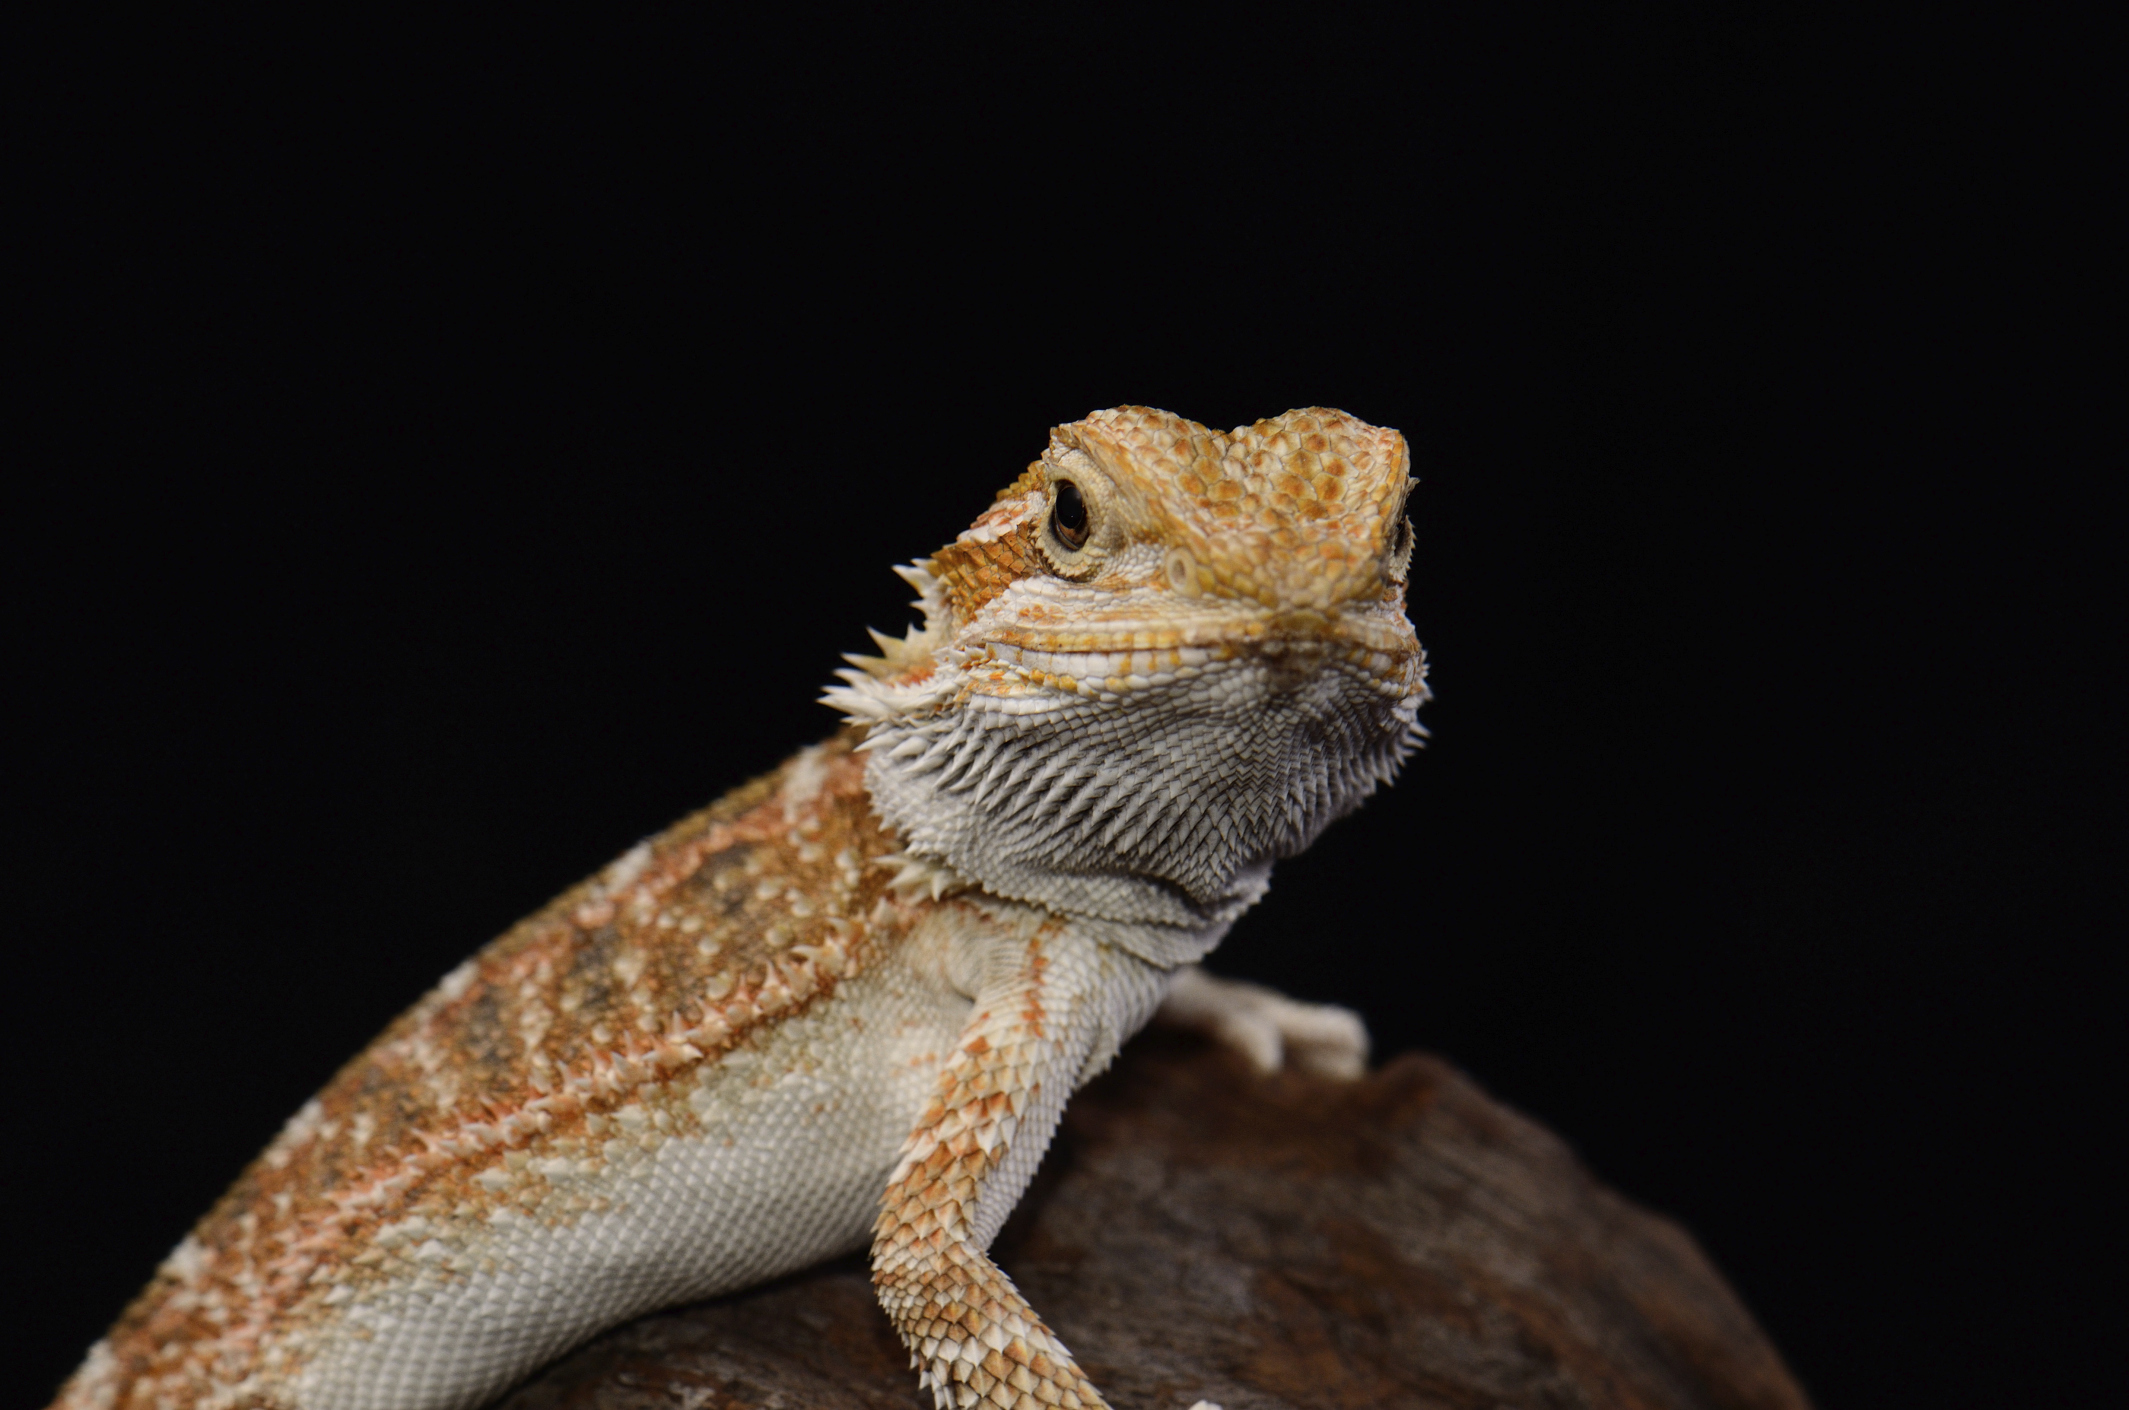 A bearded dragon has been stolen and is now in grave danger